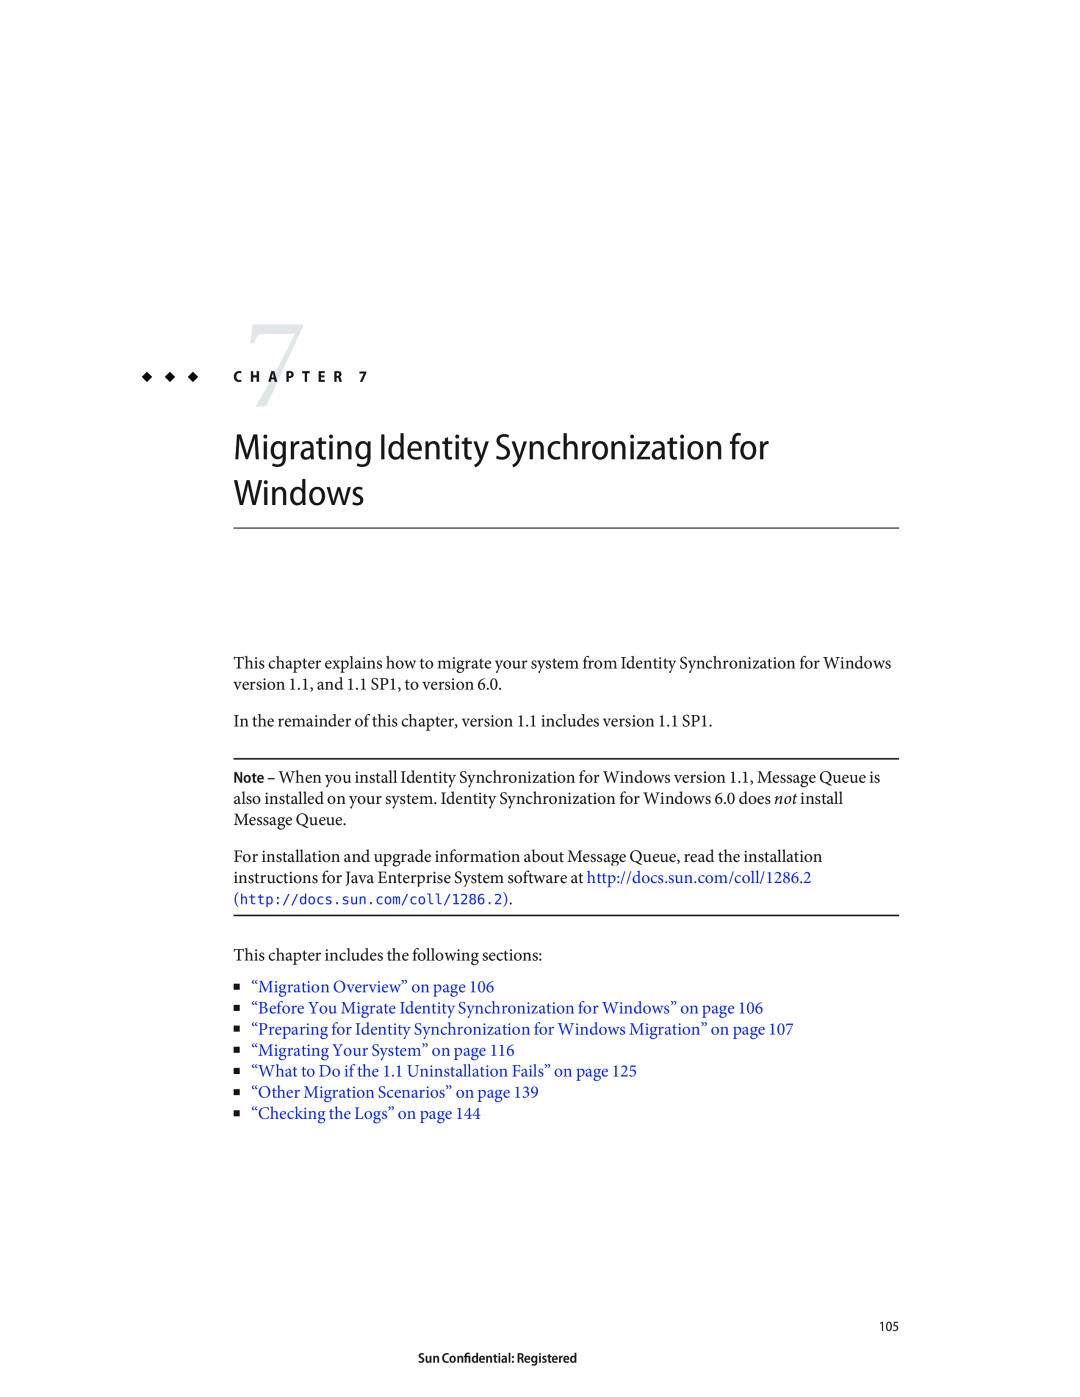 Sun Microsystems 8190994 manual Migrating Identity Synchronization for Windows, “Migration Overview” on page 